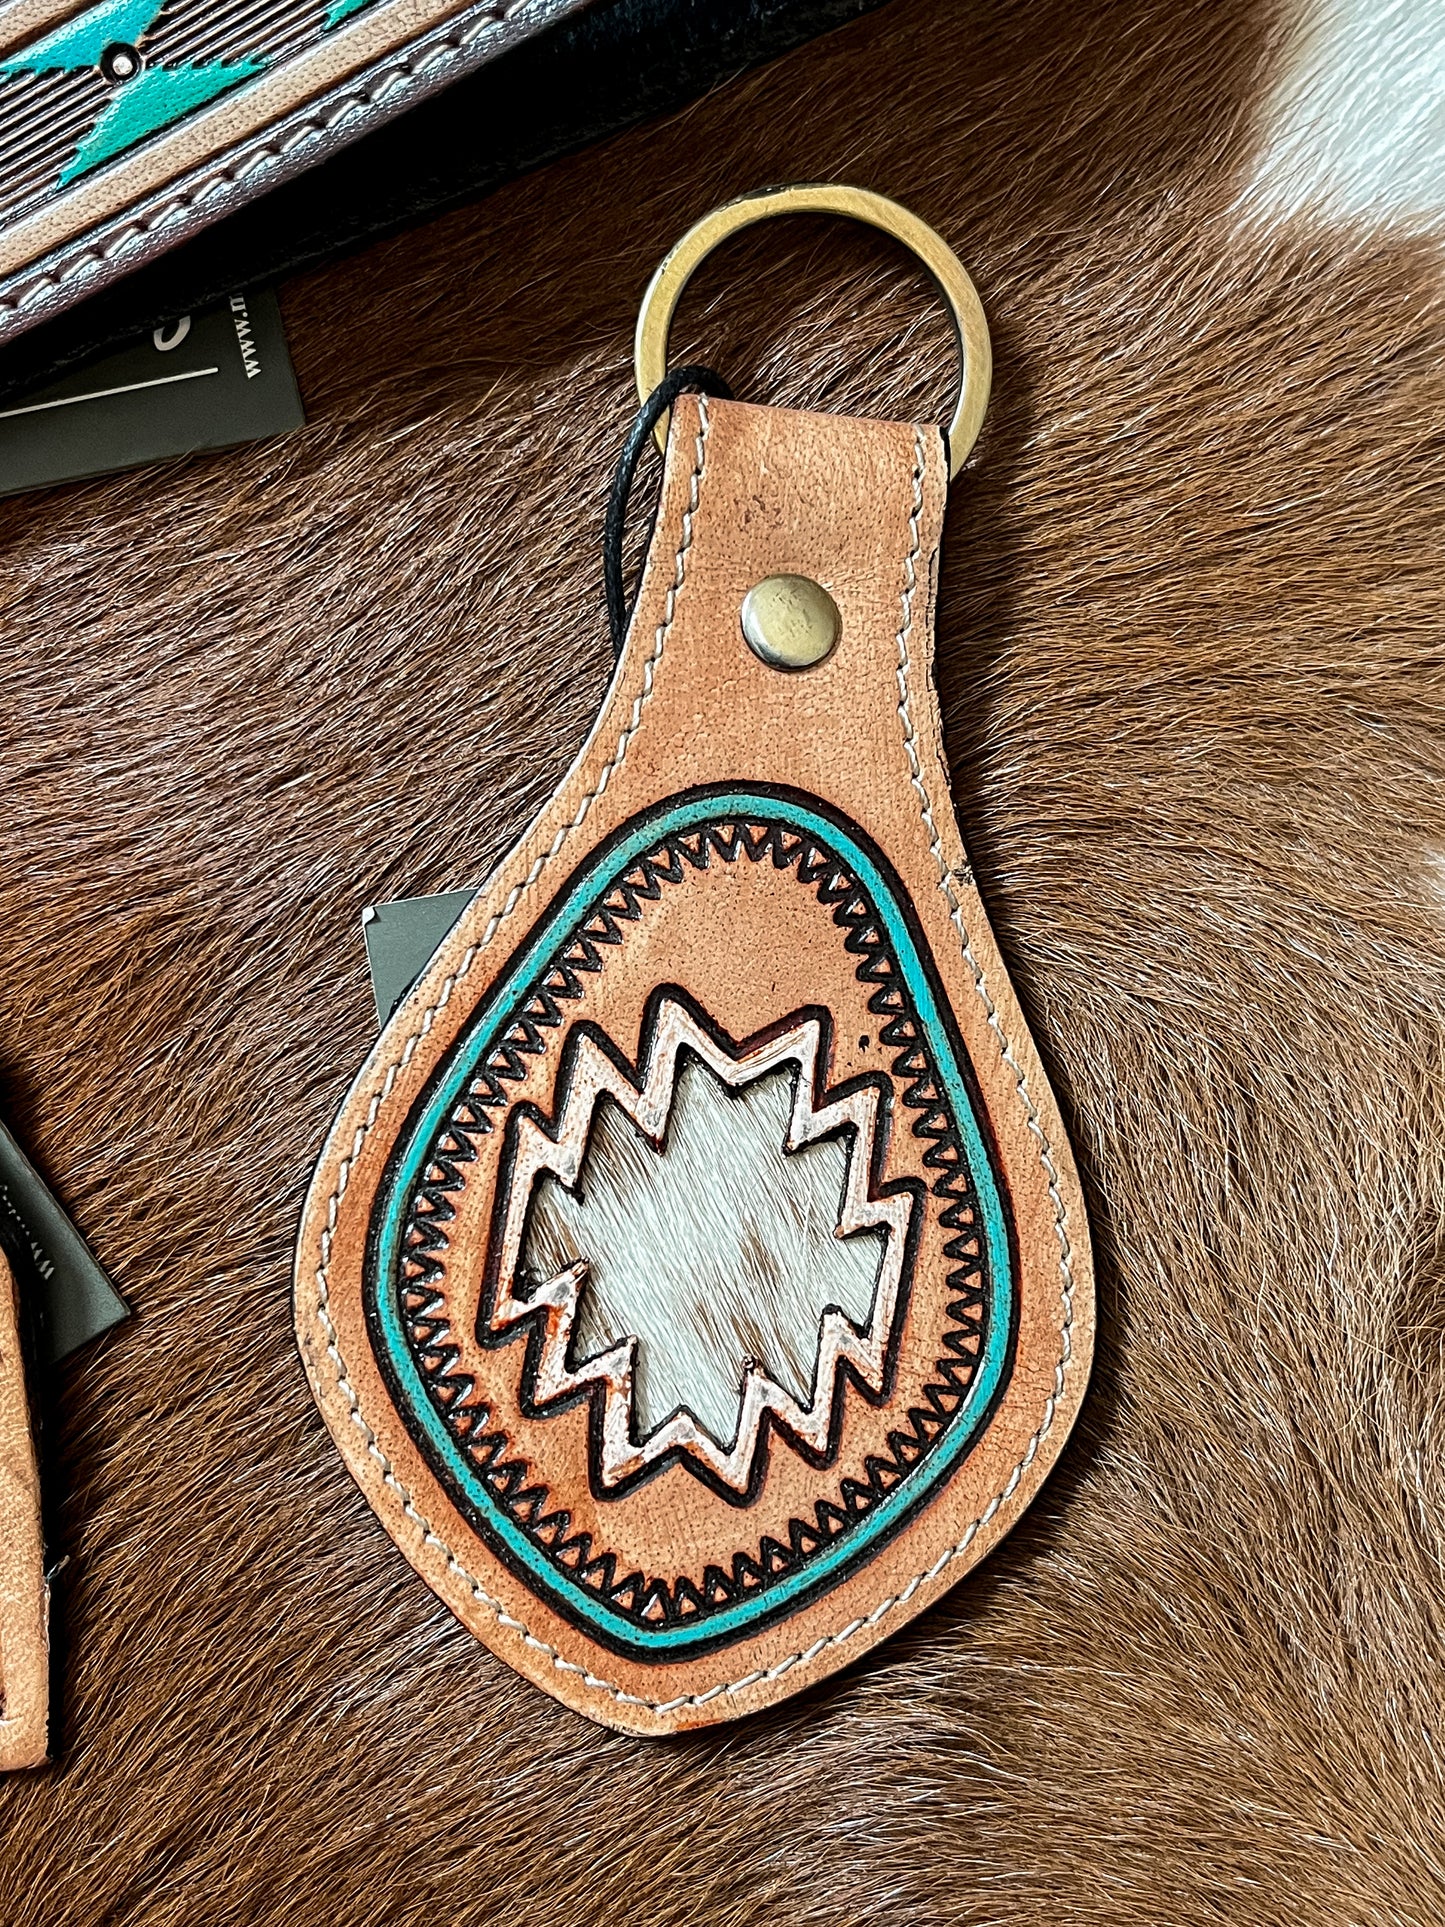 The Tooled Leather Keychains